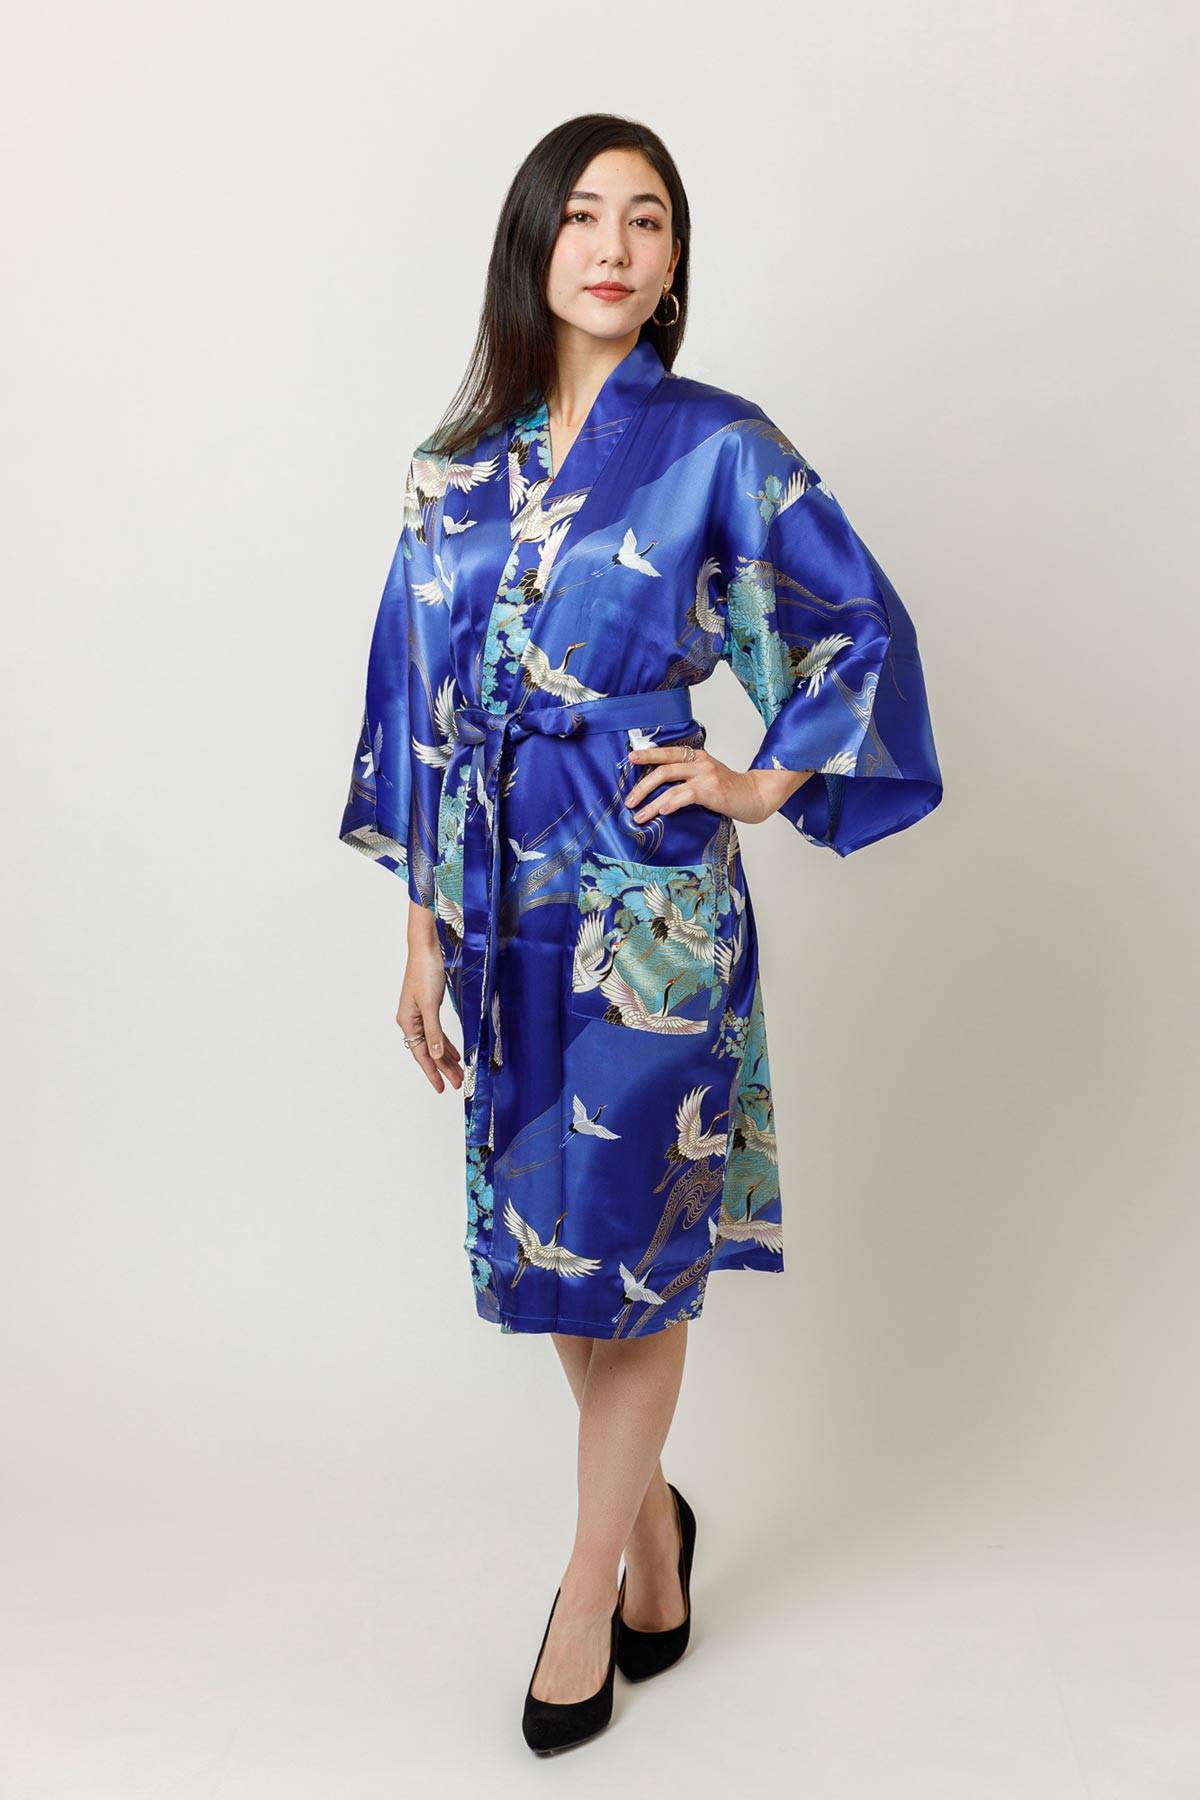 Banzai tyve Morgenøvelser 23 Things To Know About Japanese Kimono Robes – Japan Objects Store